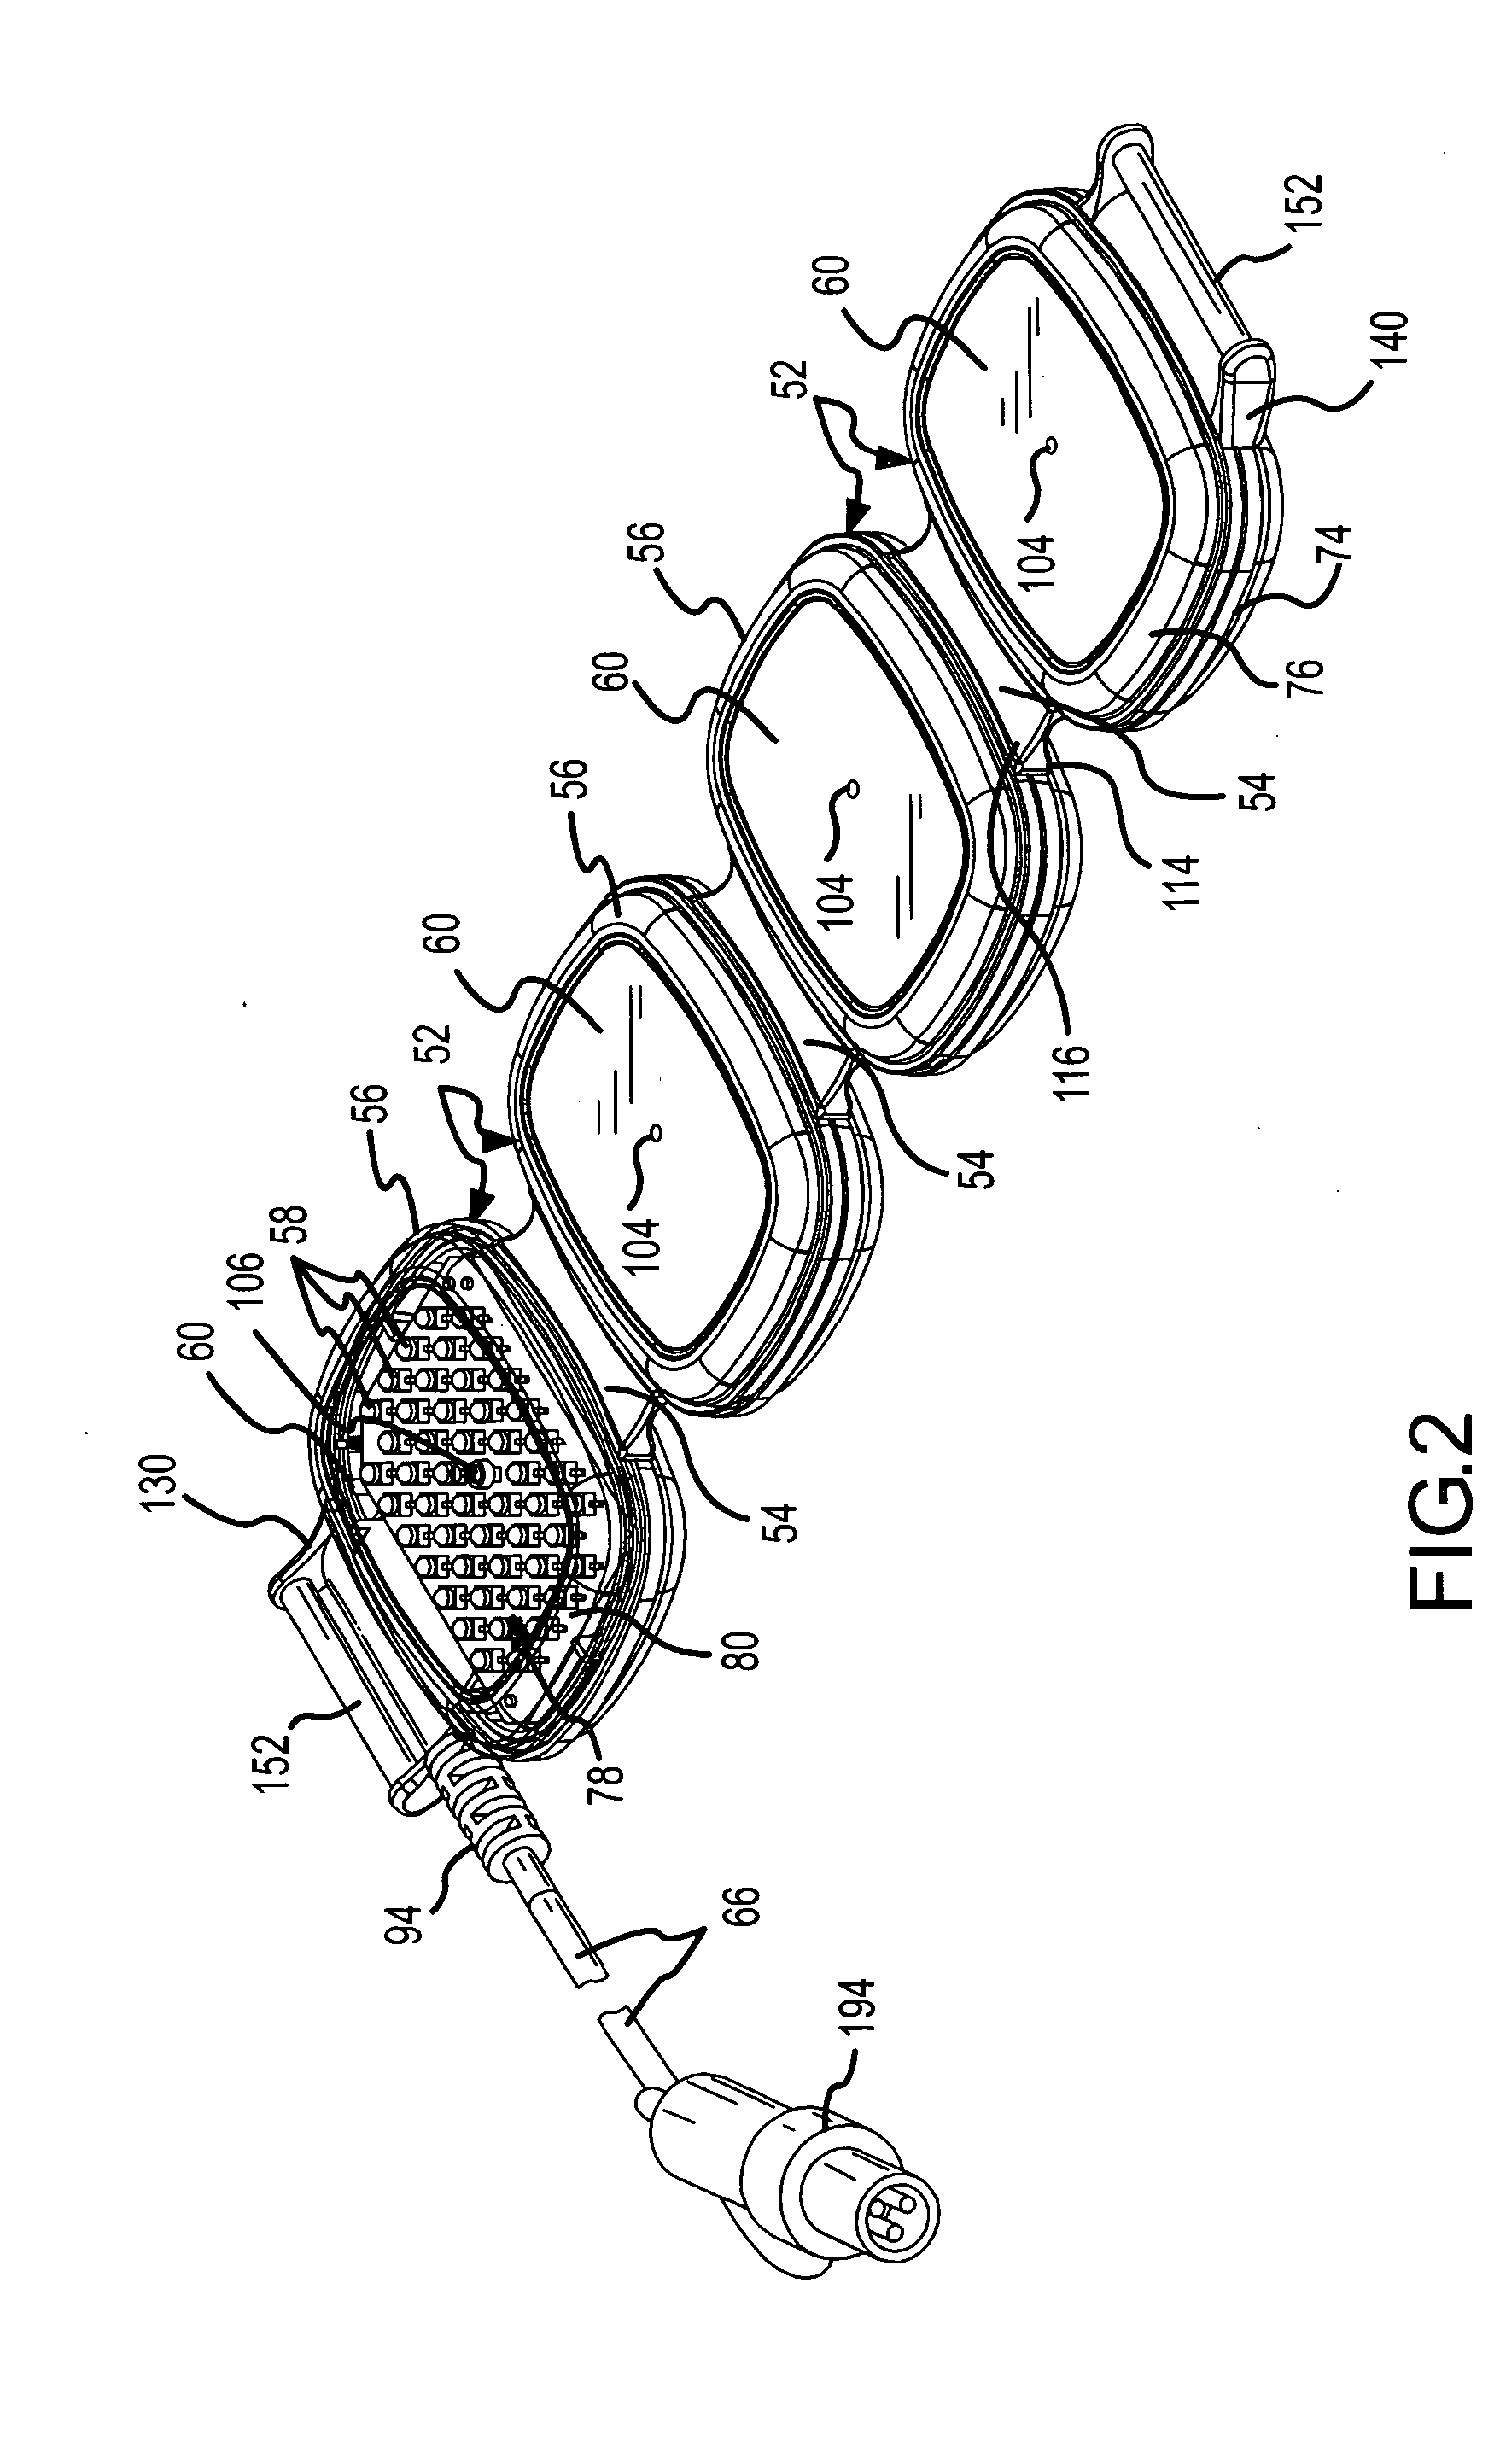 Heat and light therapy treatment device and method